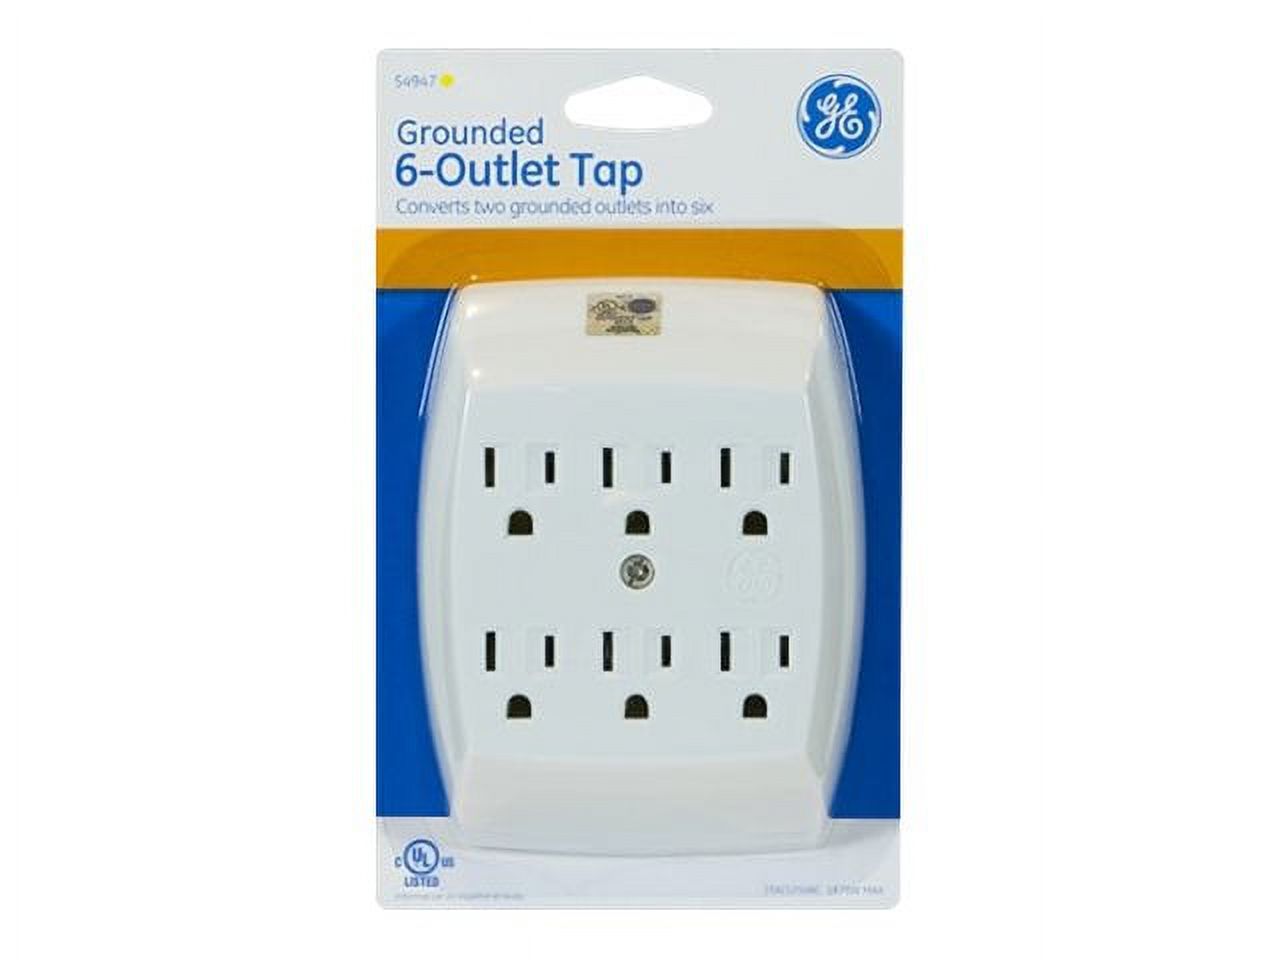 GE 3-Prong 6 Outlet Wall Adapter and Grounding Hex Tap, (White) - image 3 of 4